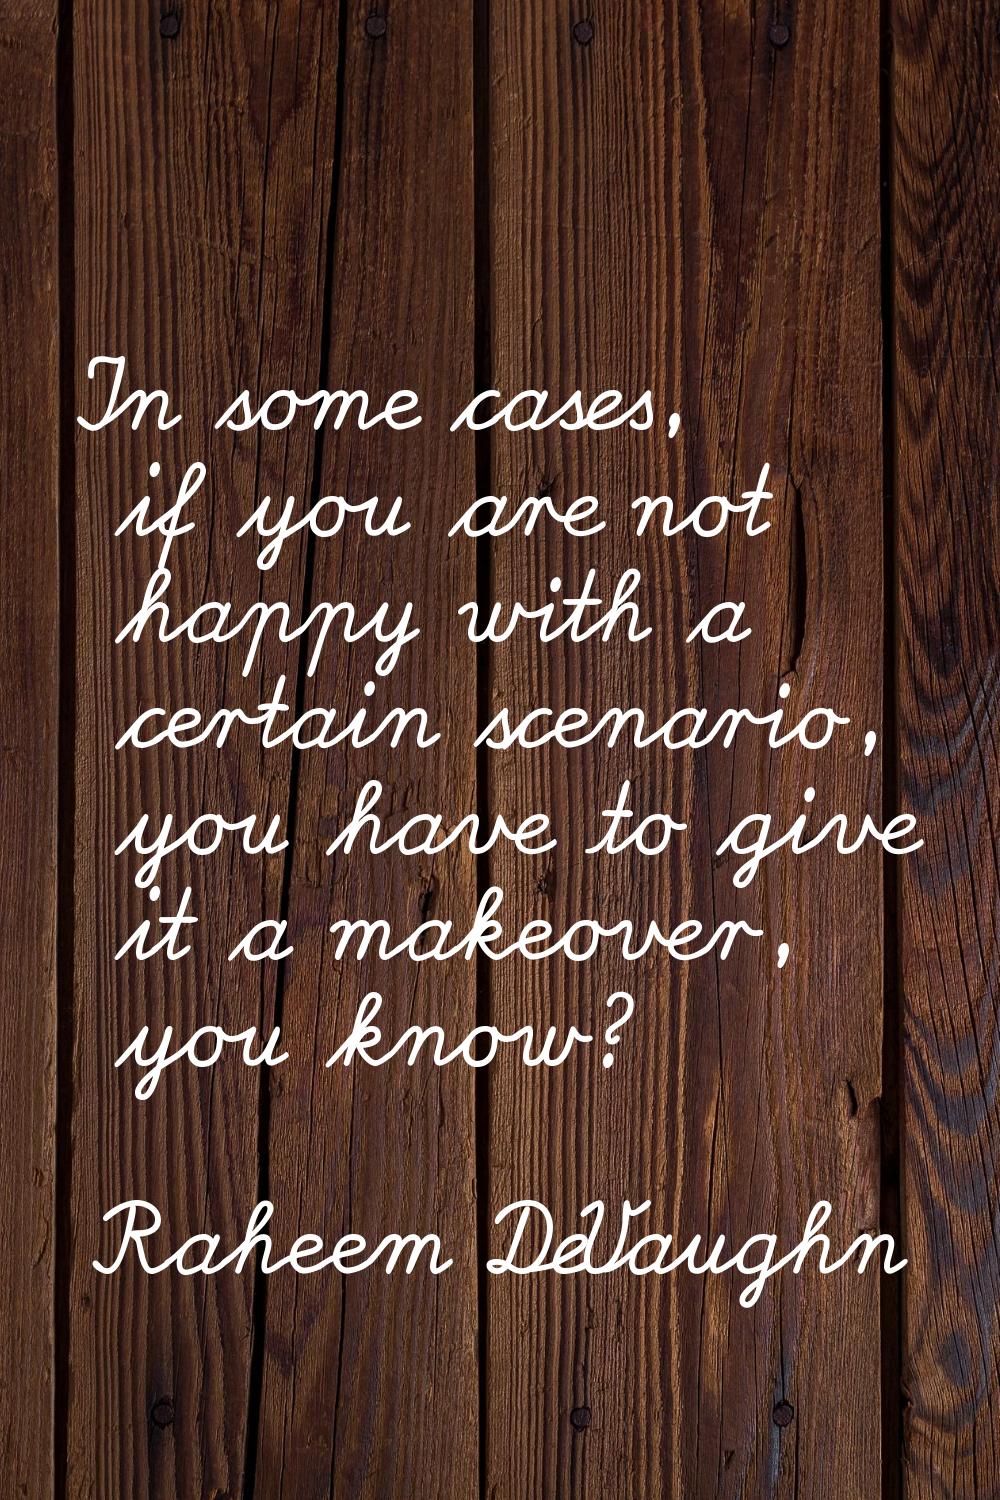 In some cases, if you are not happy with a certain scenario, you have to give it a makeover, you kn